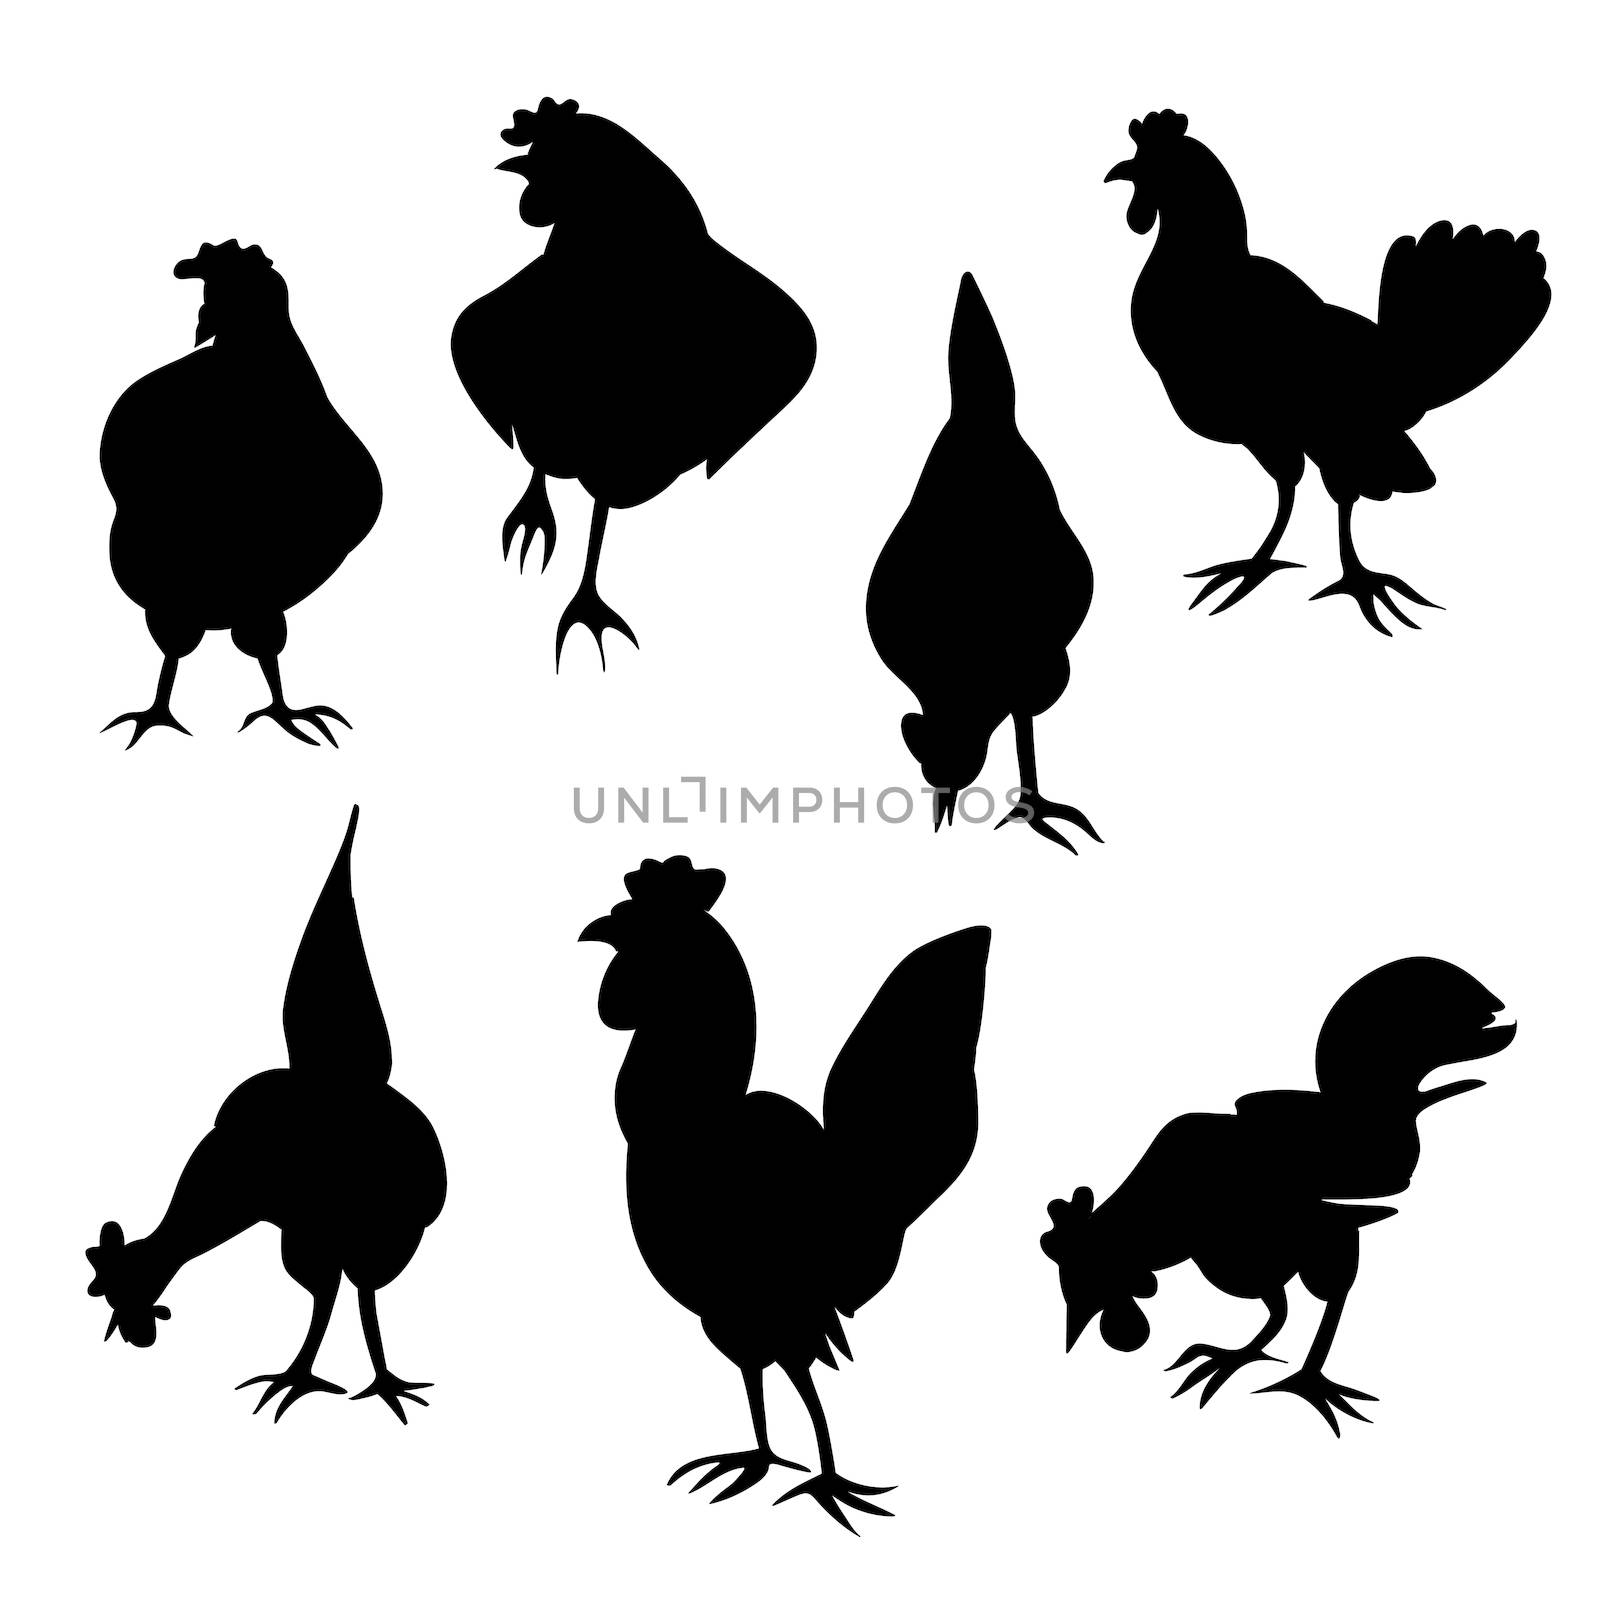 Hens and roosters silhouettes series isolated on white